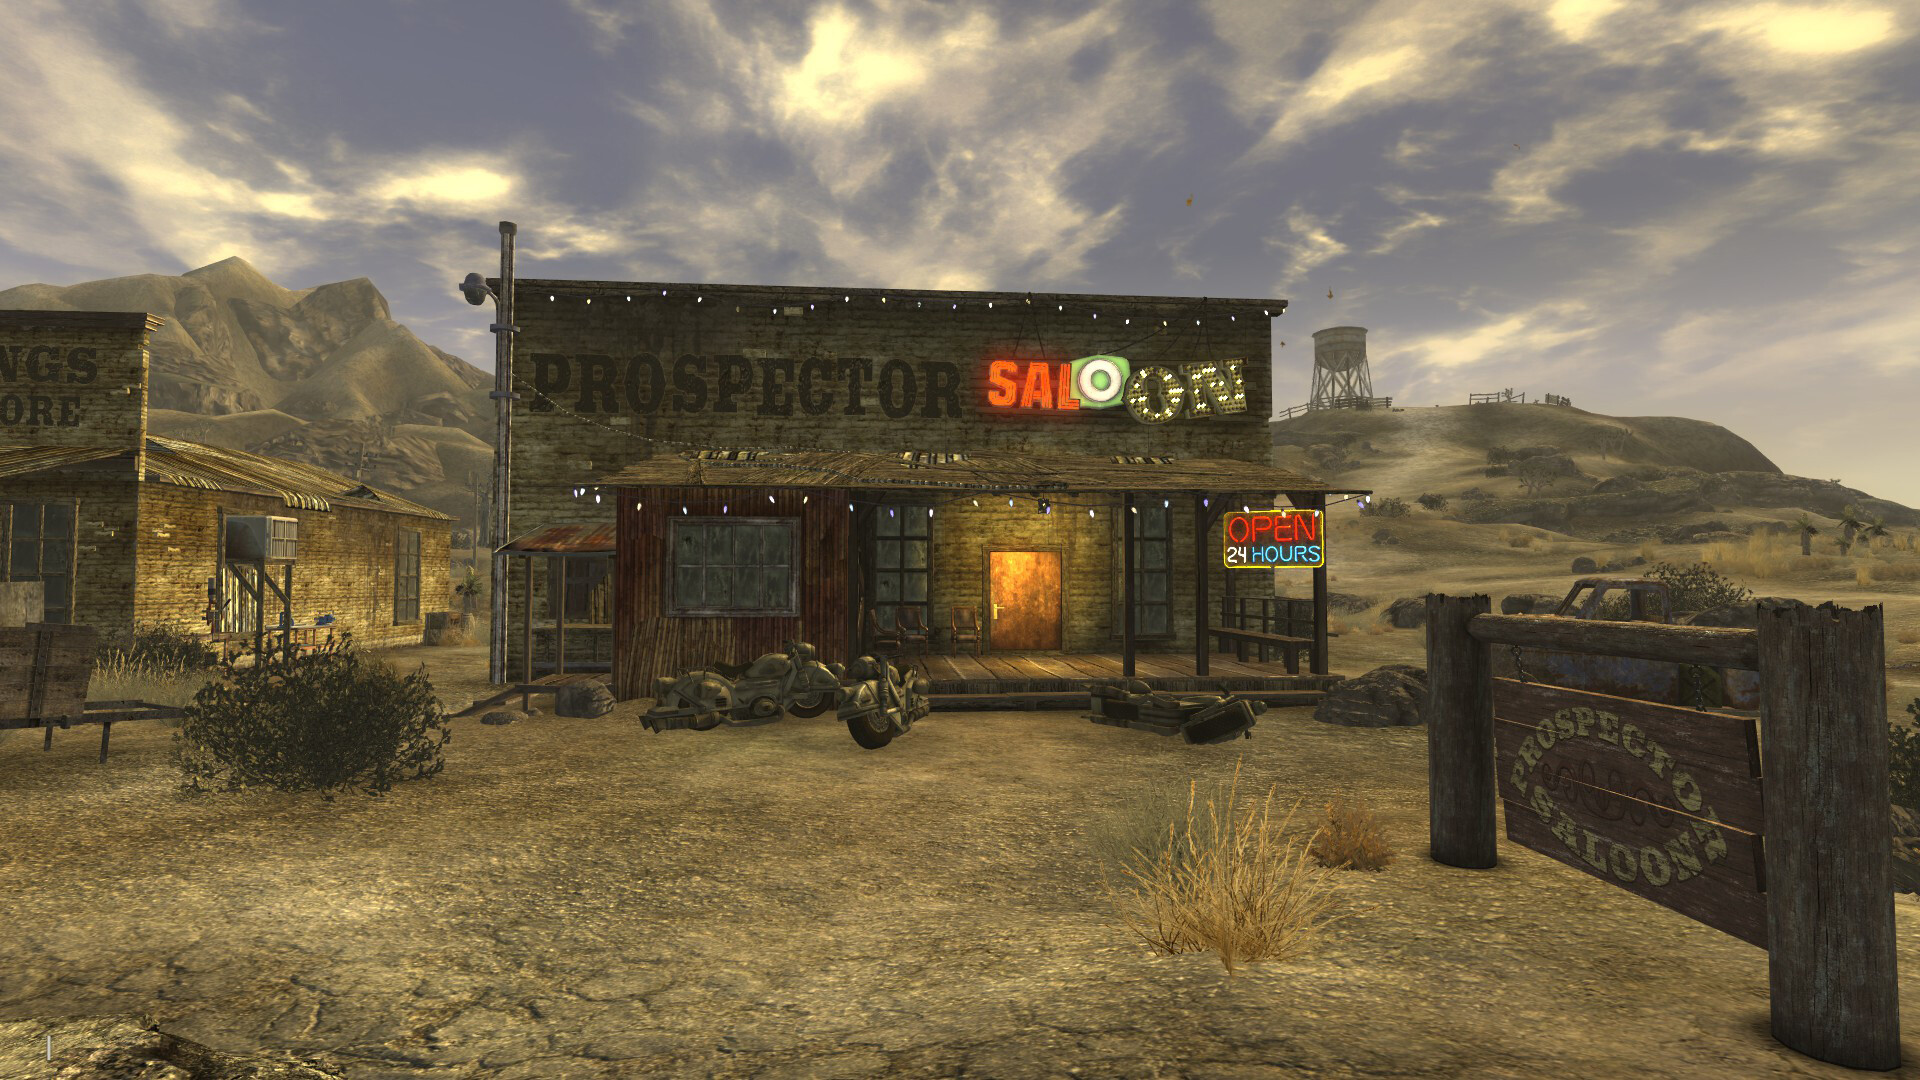 Prospector Saloon From Fallout: New Vegas.